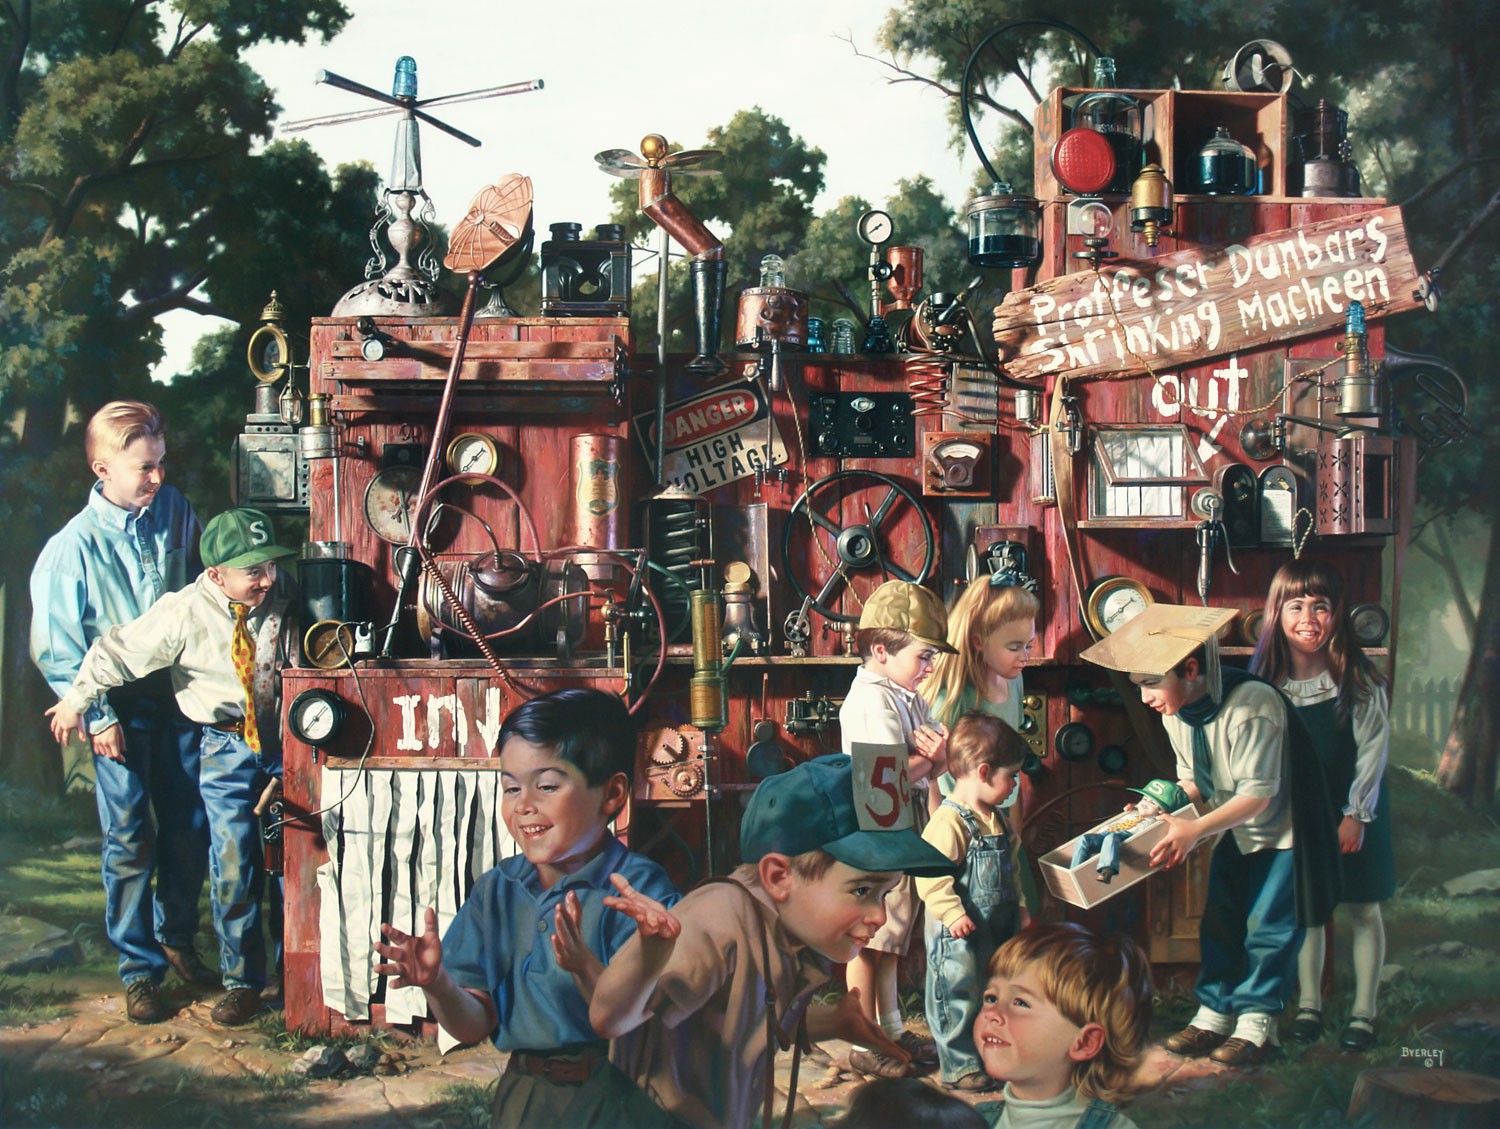 Incredible Shrinking Machine Bob Byerley Canvas Giclée Print Artist Hand Signed and Numbered